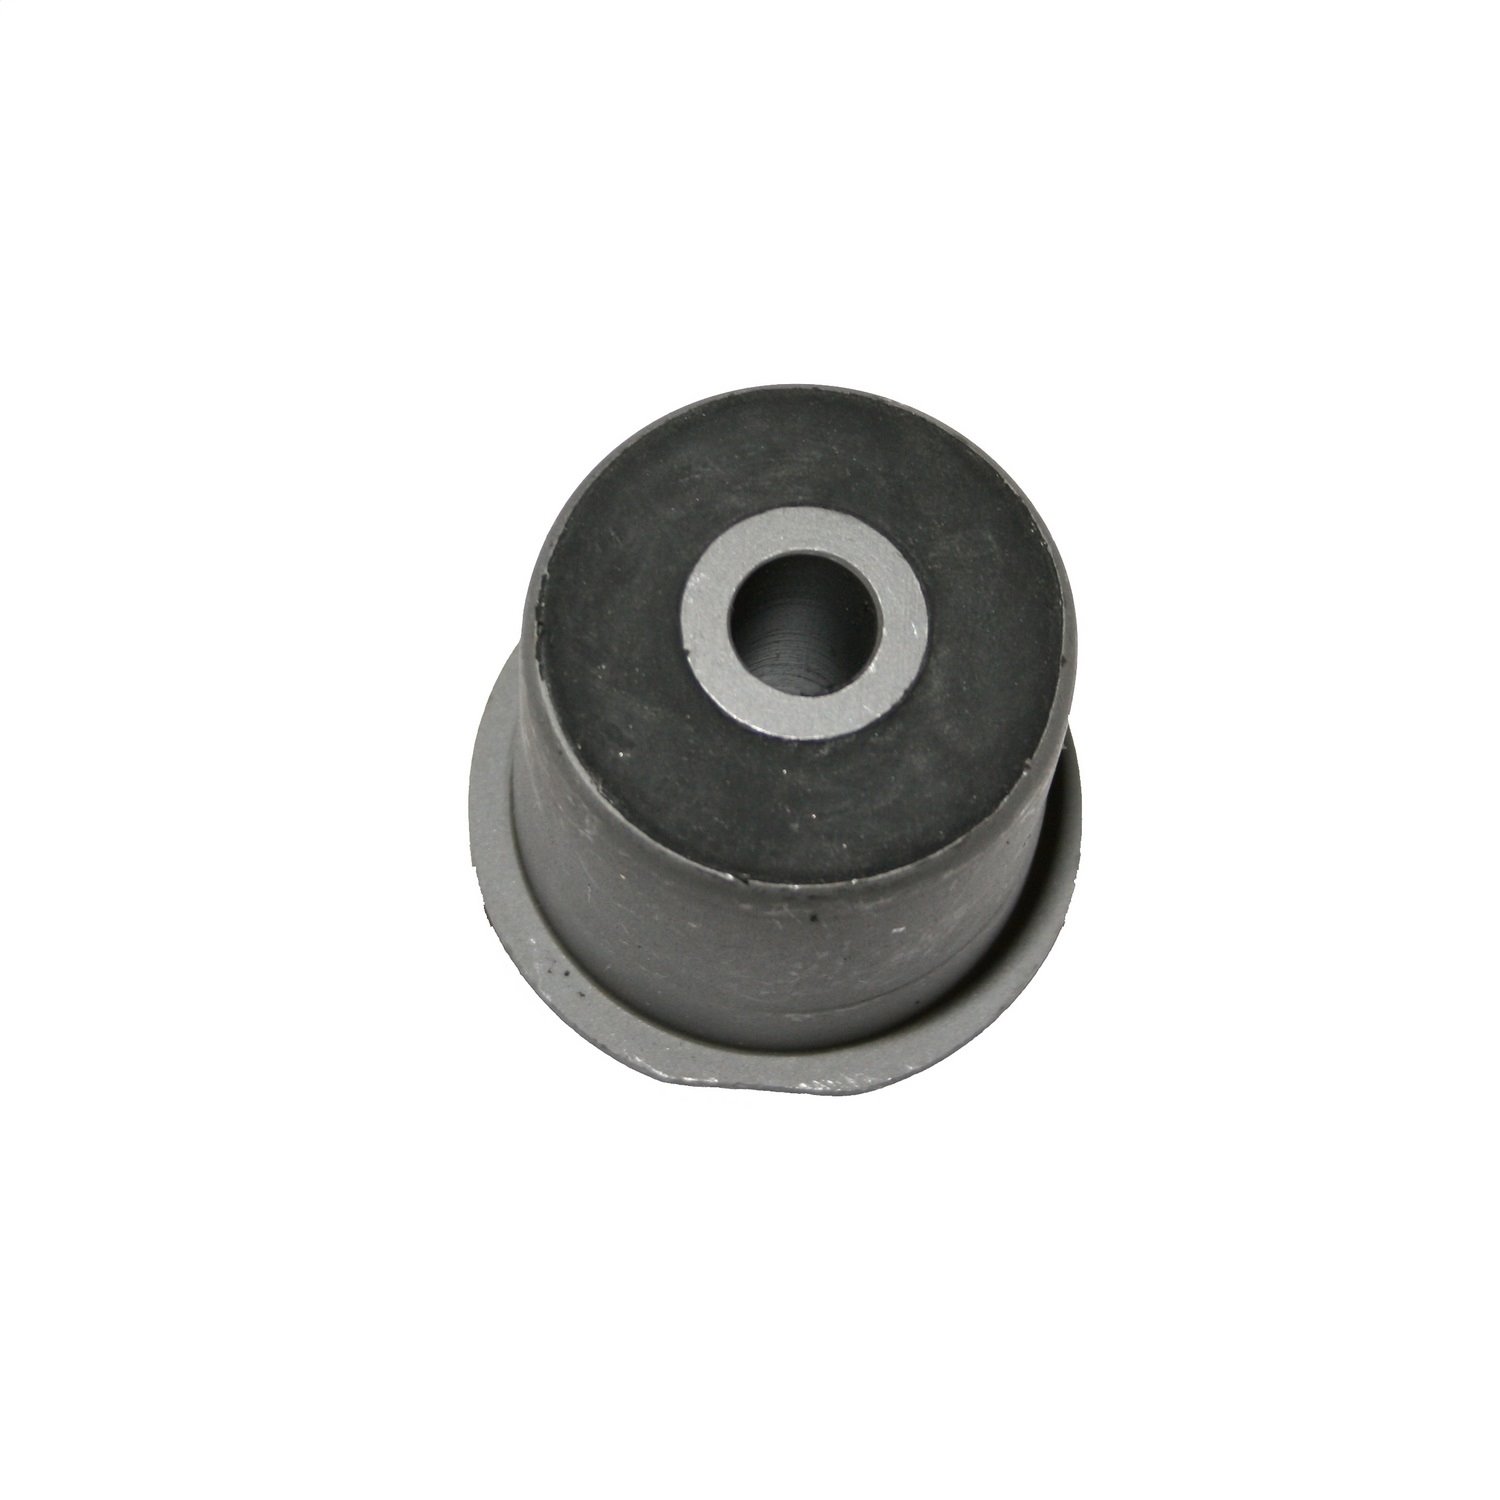 Replacement control arm bushing from Omix-ADA, Fits front or rear lower control arms on 84-0